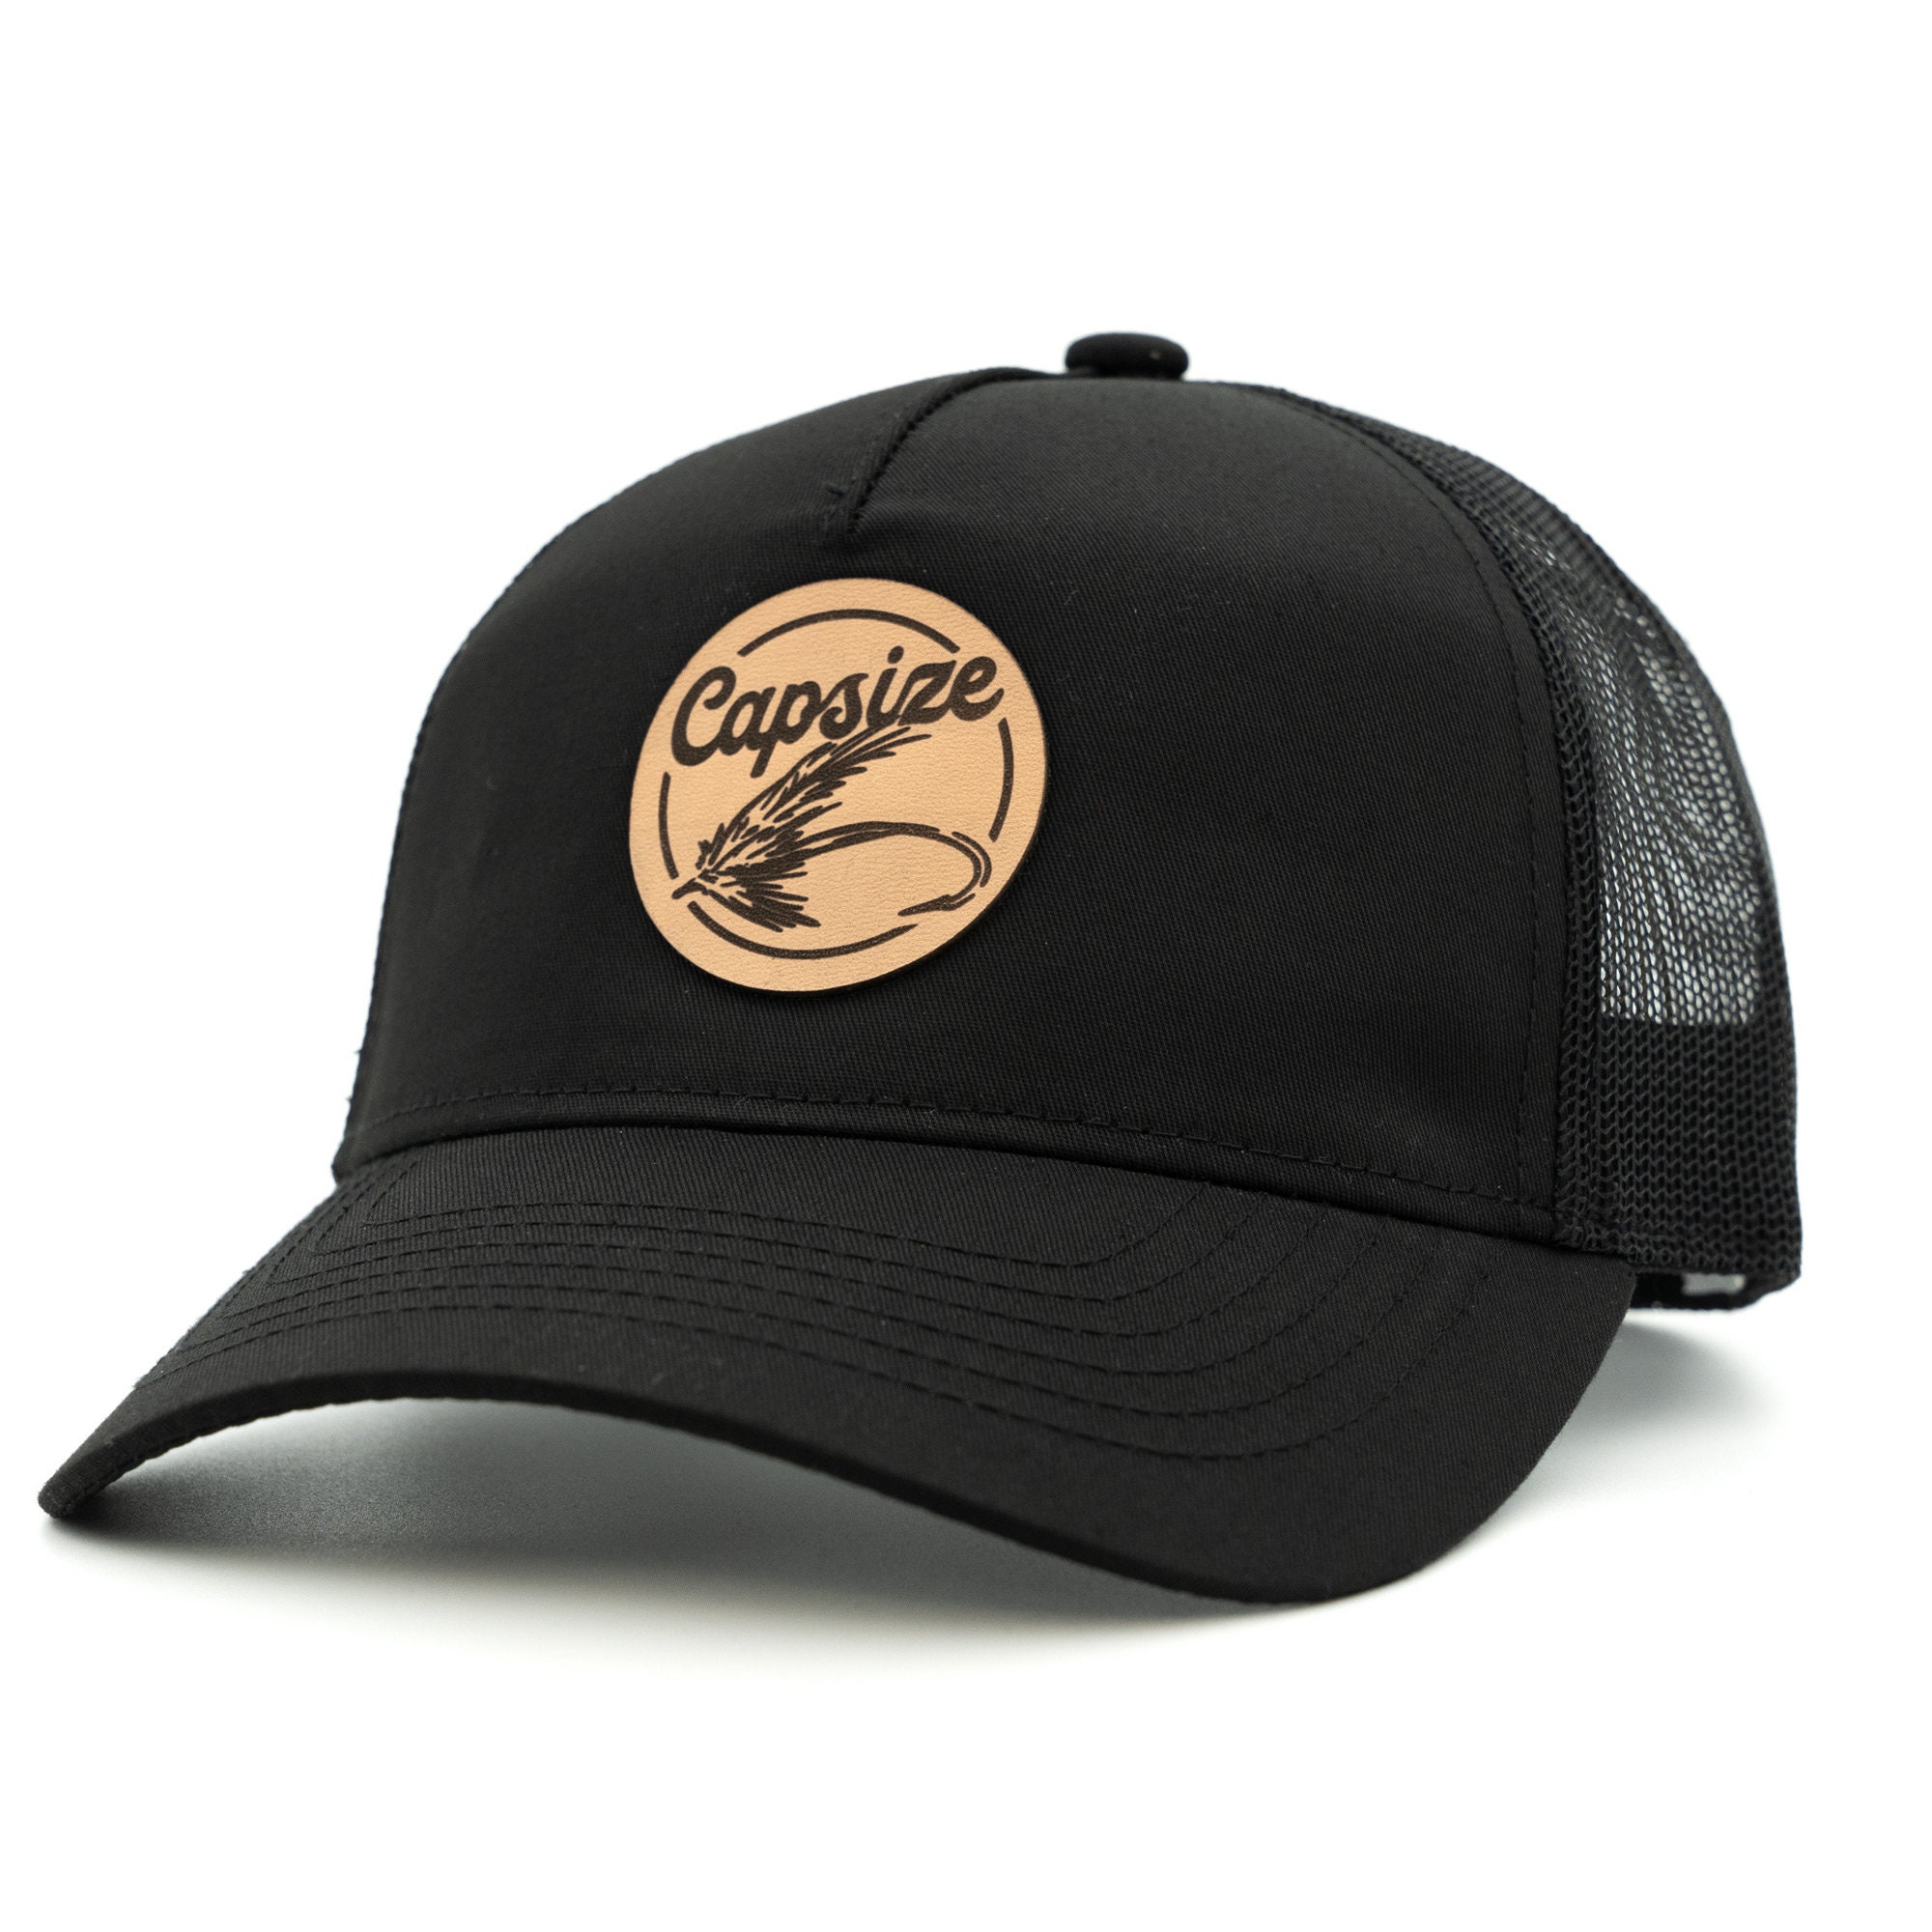 Leather Fly Women Ponytail Trucker Hat Capsize Fly Fishing 